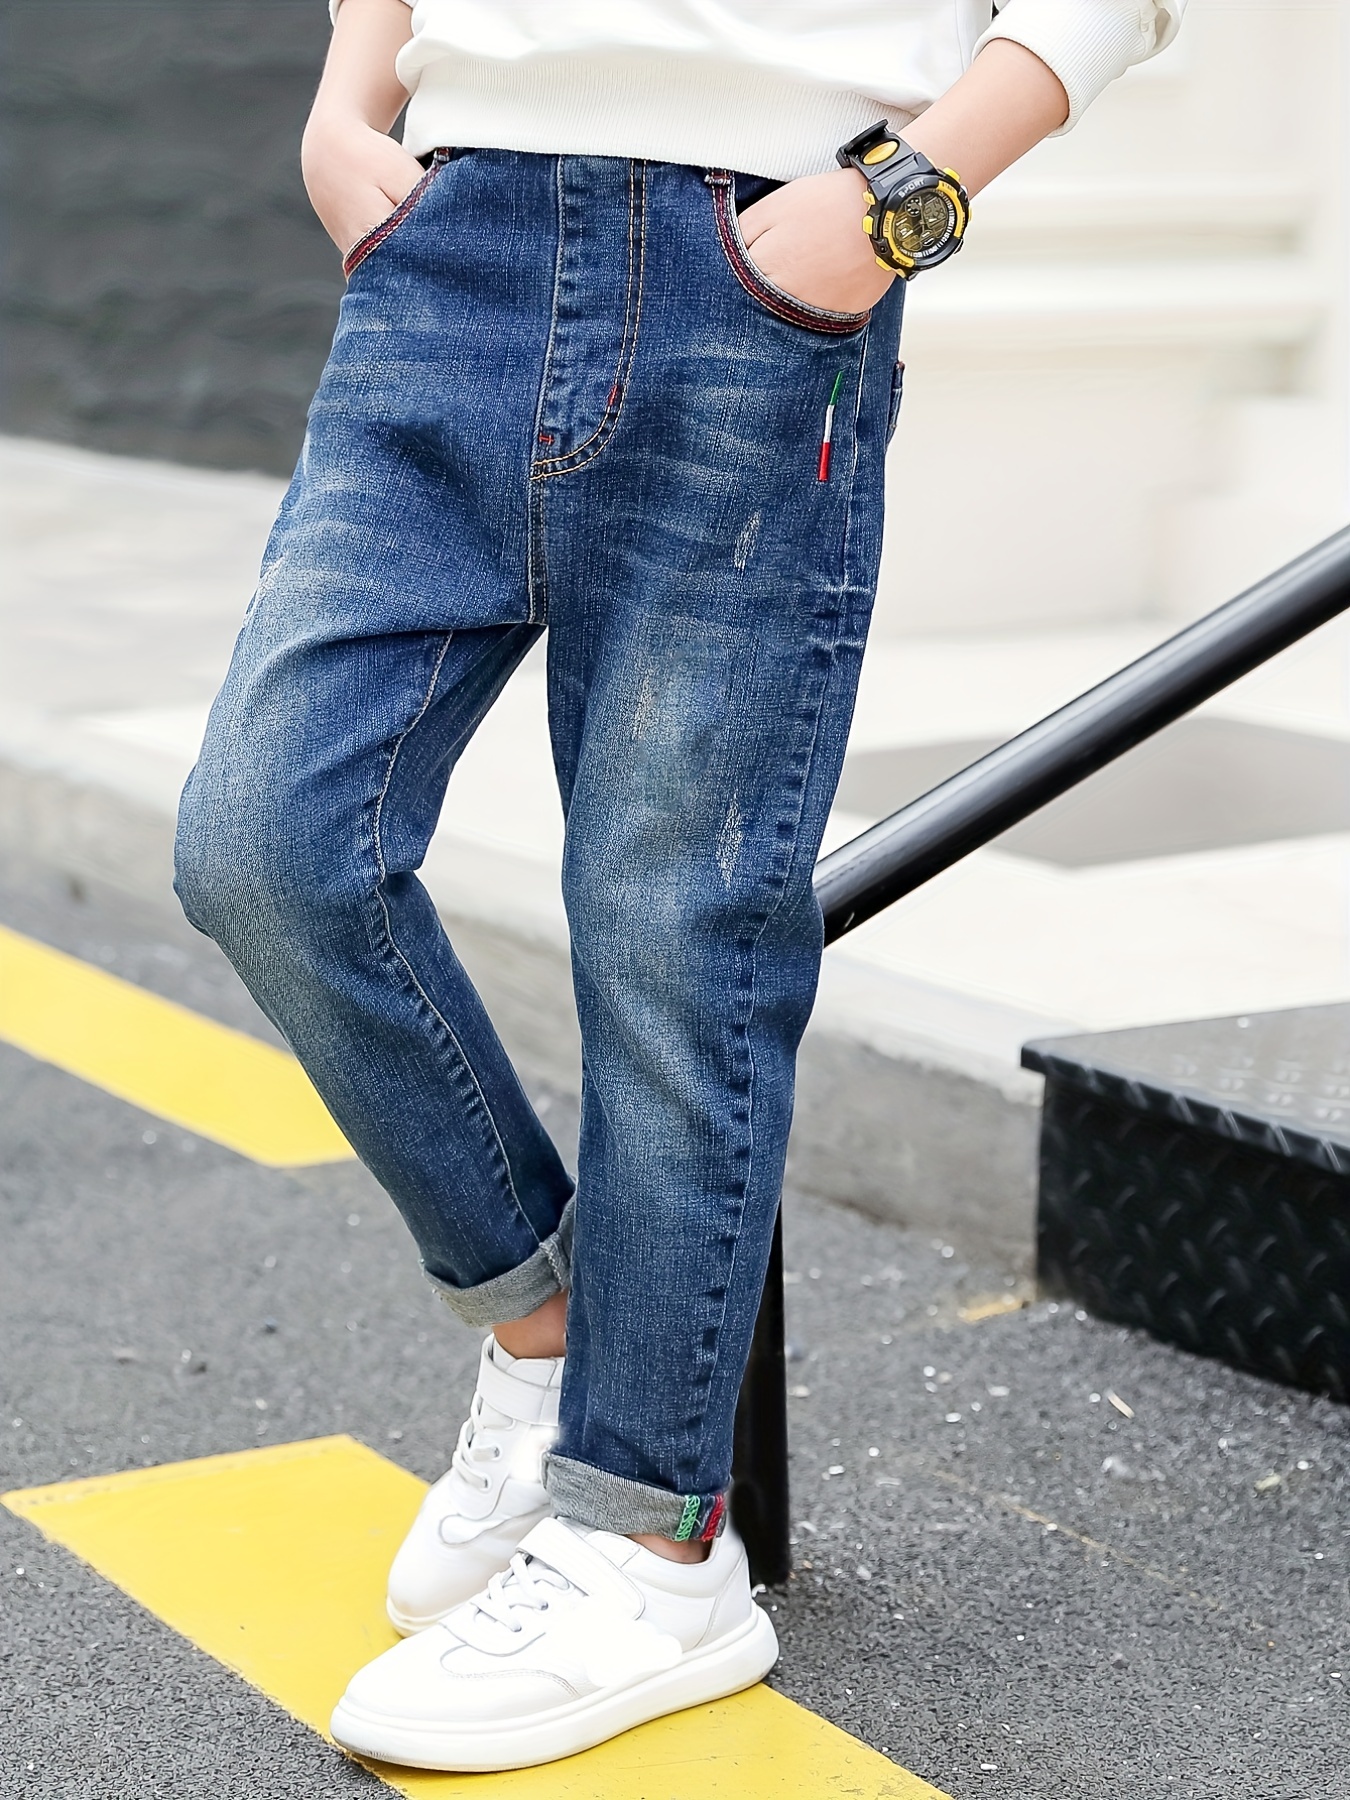 Boys Pants Boys Fashion Washed Jeans Pants 2-12 Years Old Kids